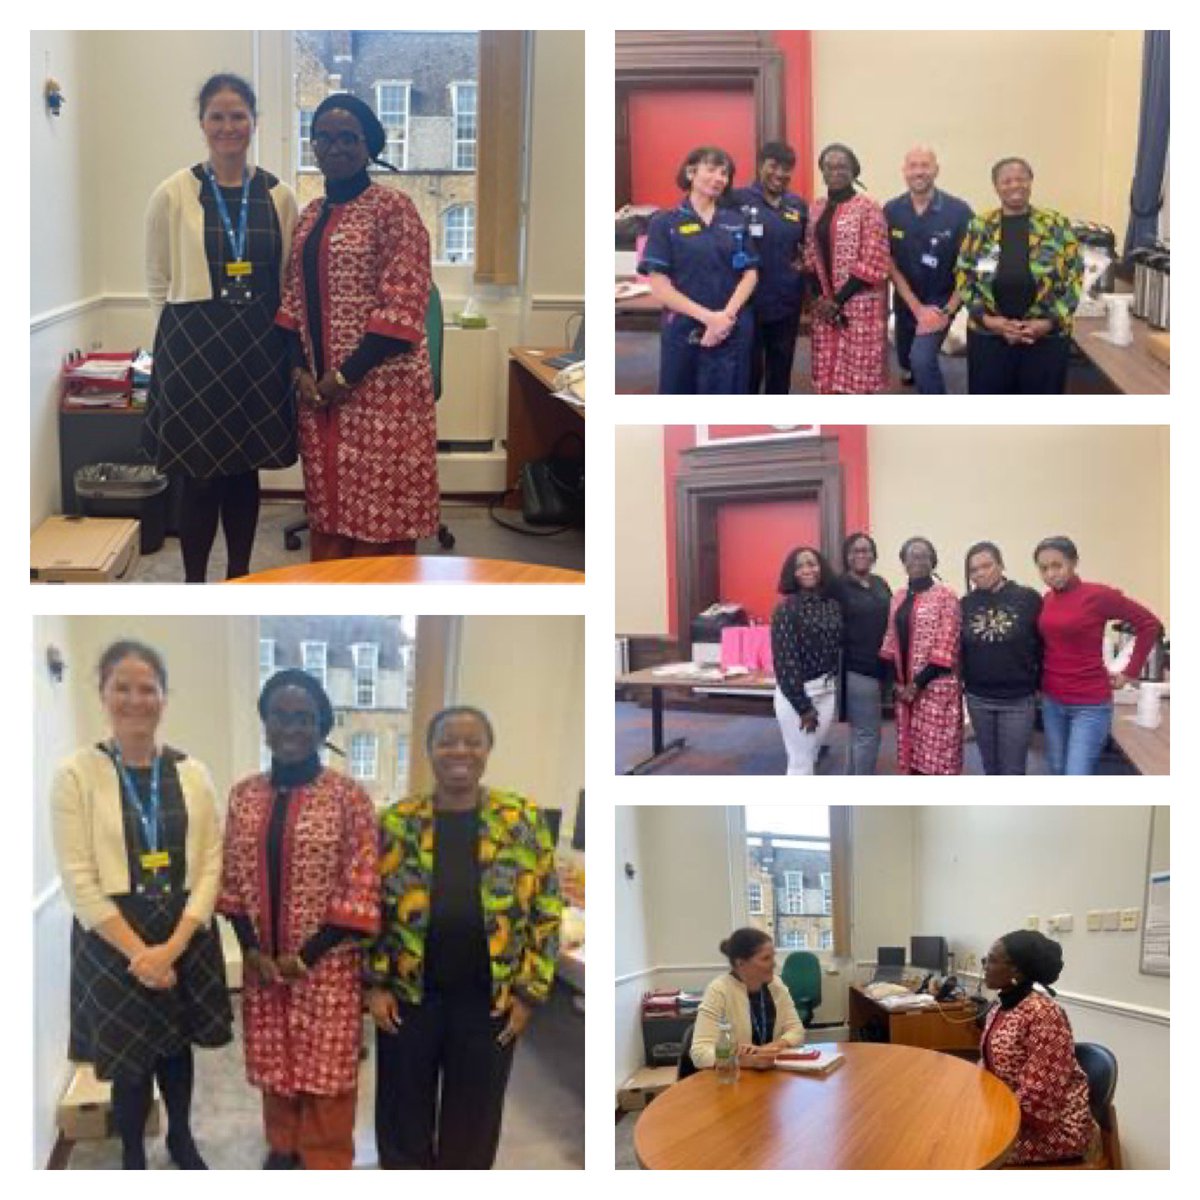 Honoured to meet Francisca Okafor, CNO at the federal ministry of health of Nigeria 🇳🇬 We discussed leadership challenges and professional nursing and practice across our countries.